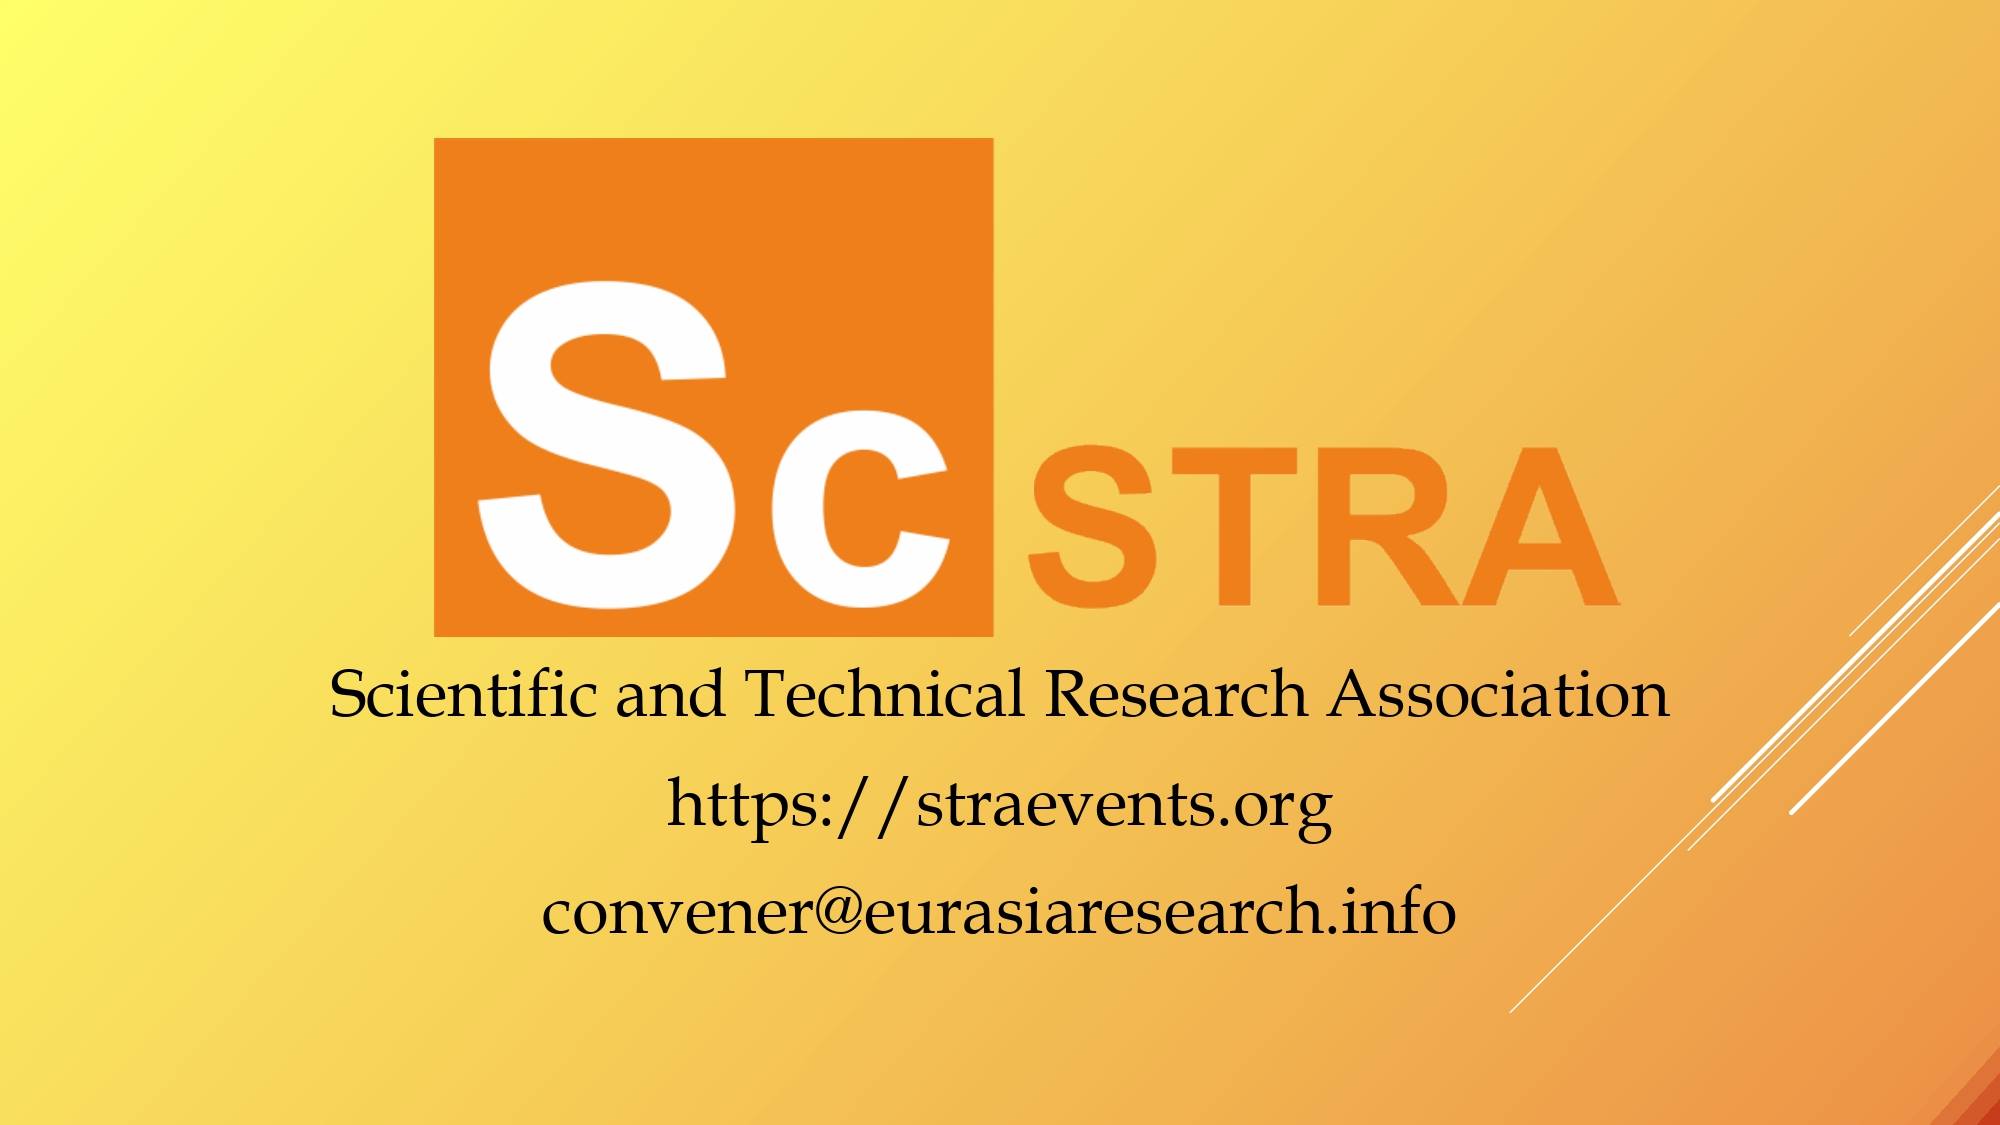 10th ICSTR Dubai – International Conference on Science & Technology Research, 02-03 November 2022